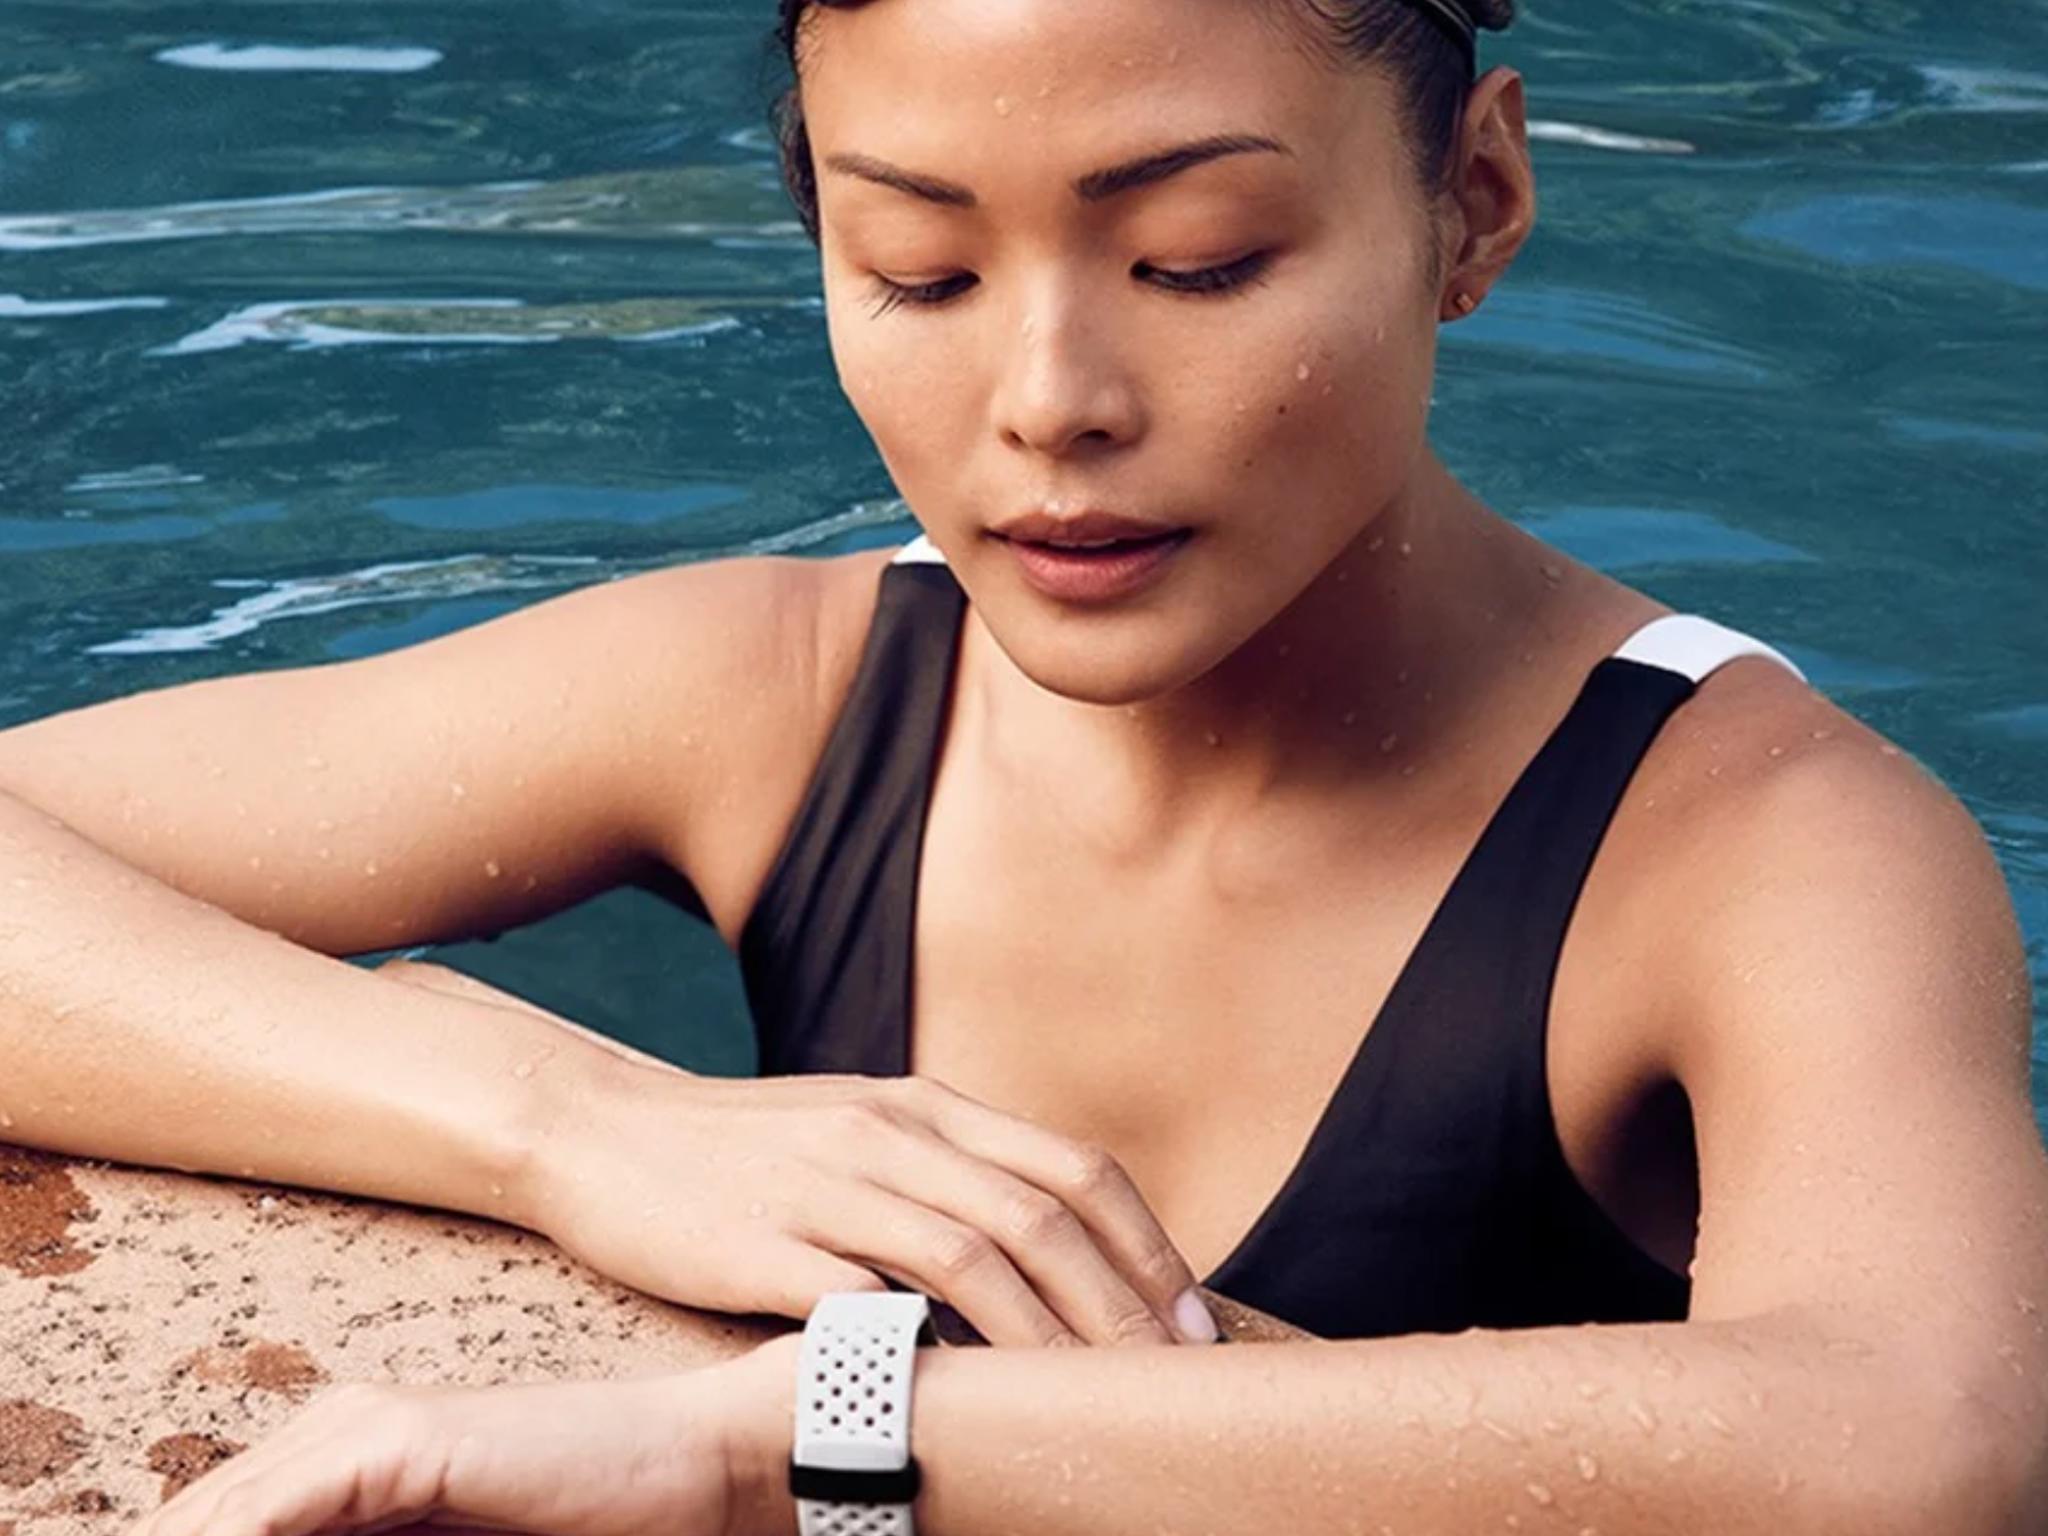 are fitbit charge waterproof